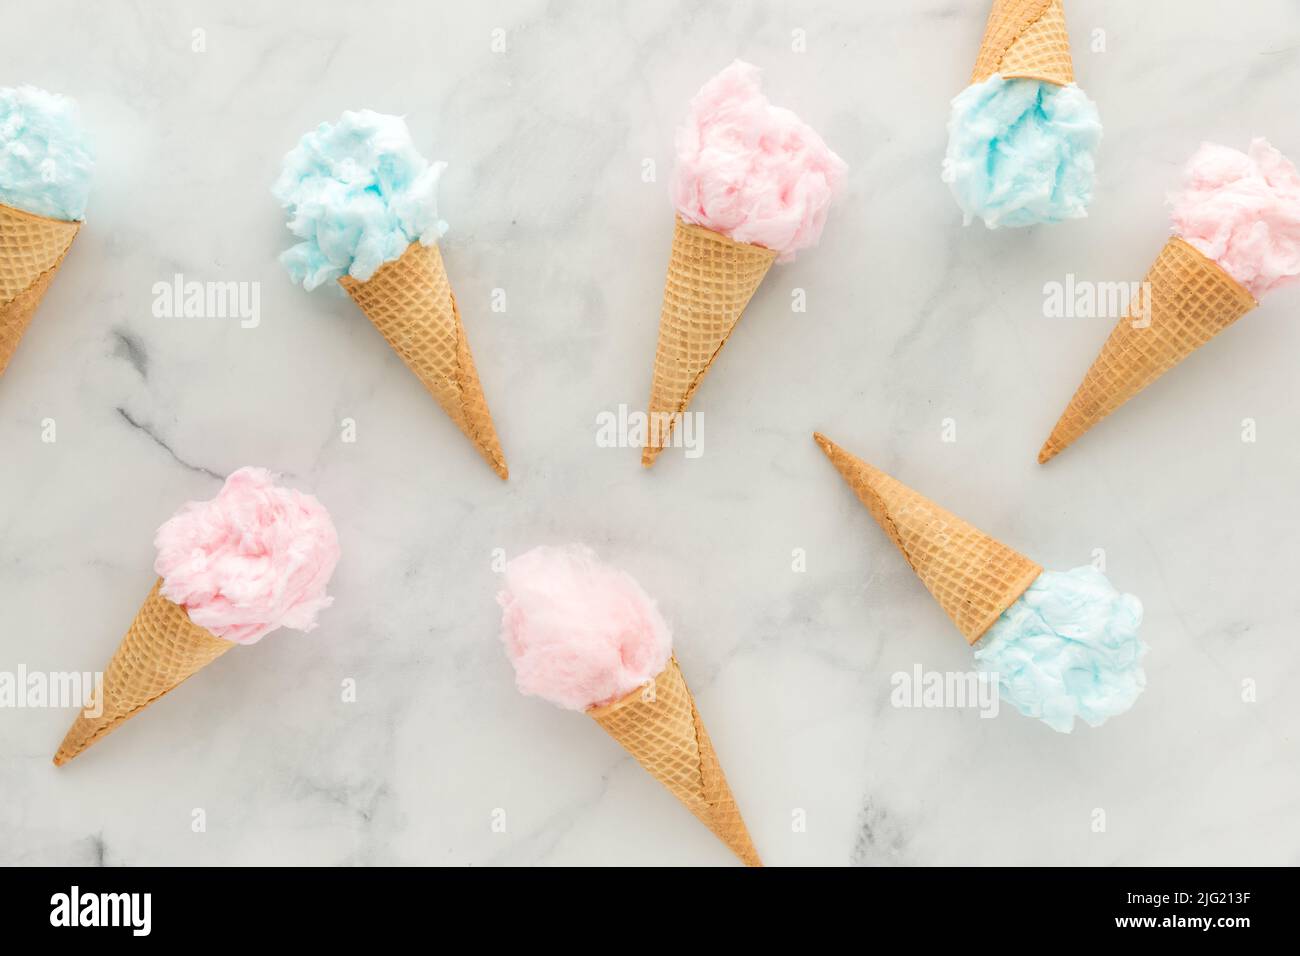 Several waffle cones filled with cotton candy scattered about. Stock Photo